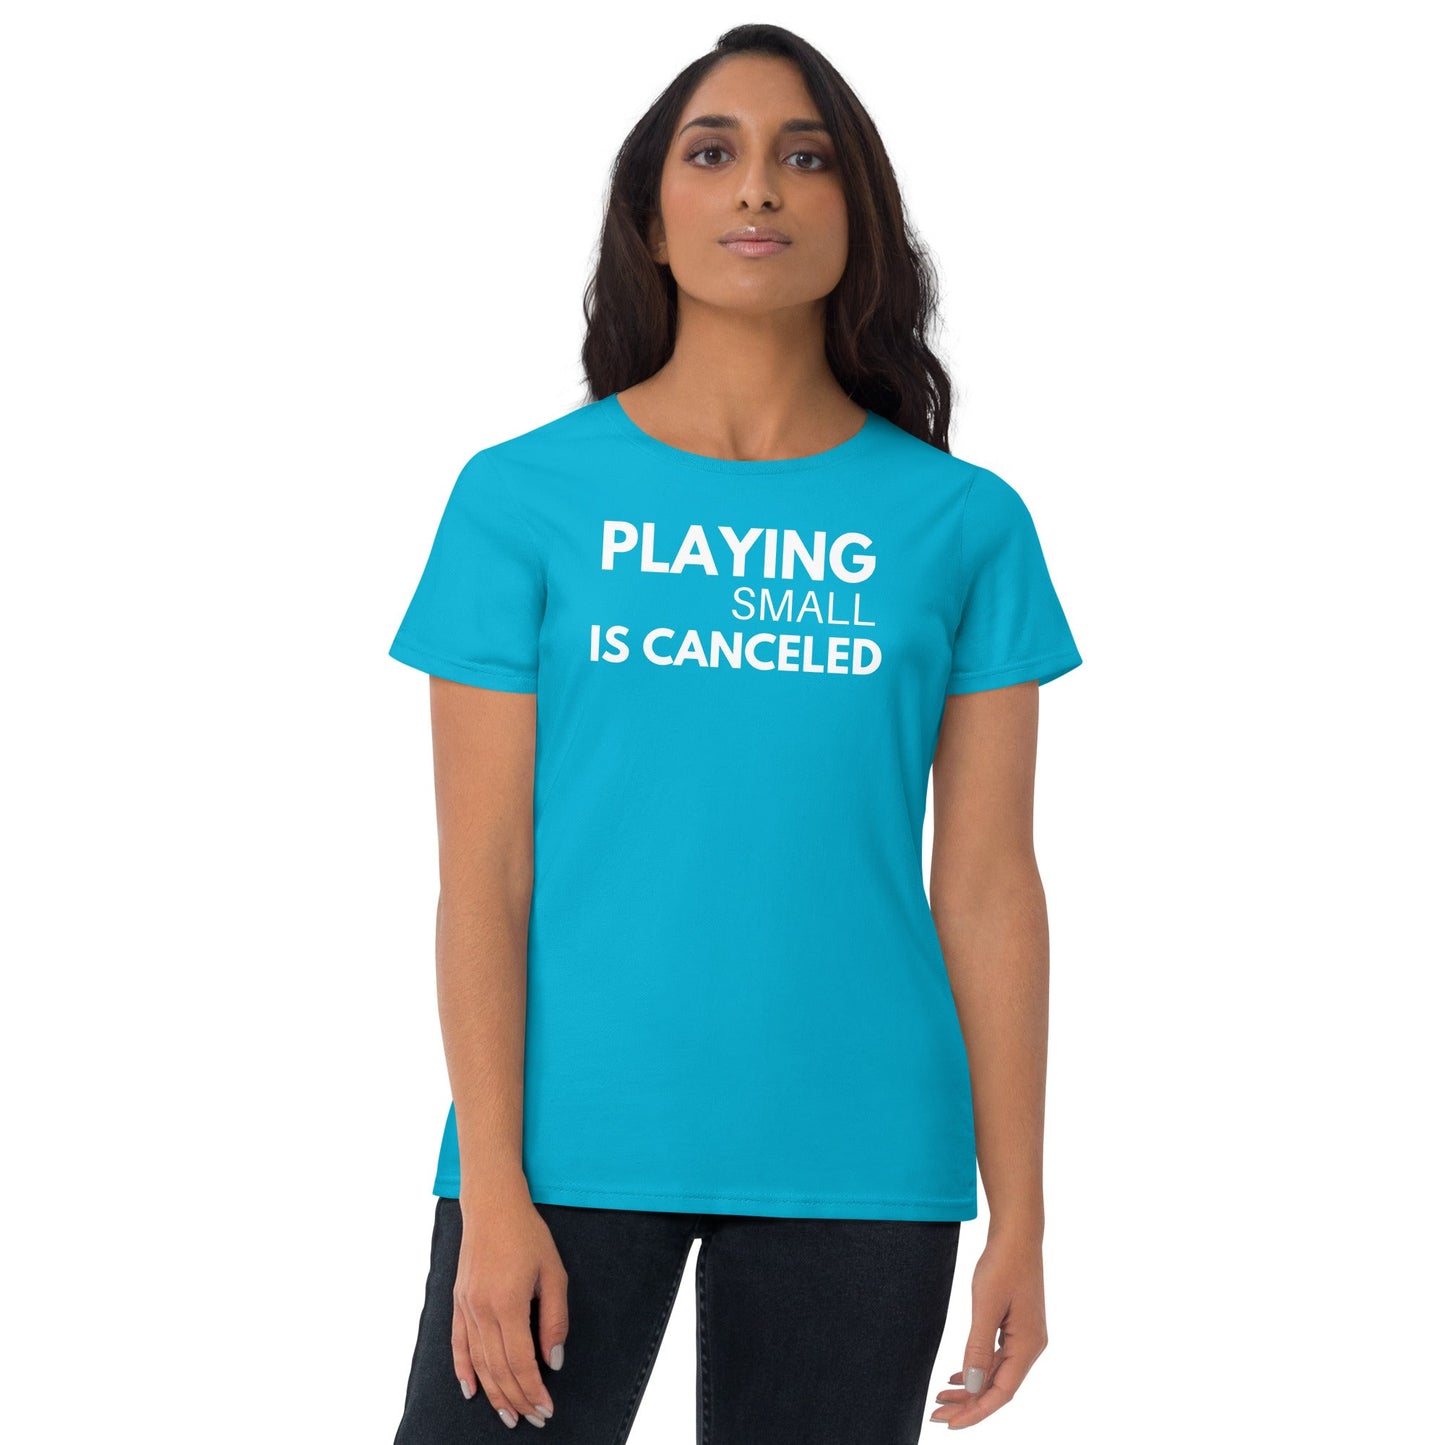 Playing Small Is Canceled Premium Short Sleeve T-shirt (Fits True To Size) - Catch This Tea Shirts